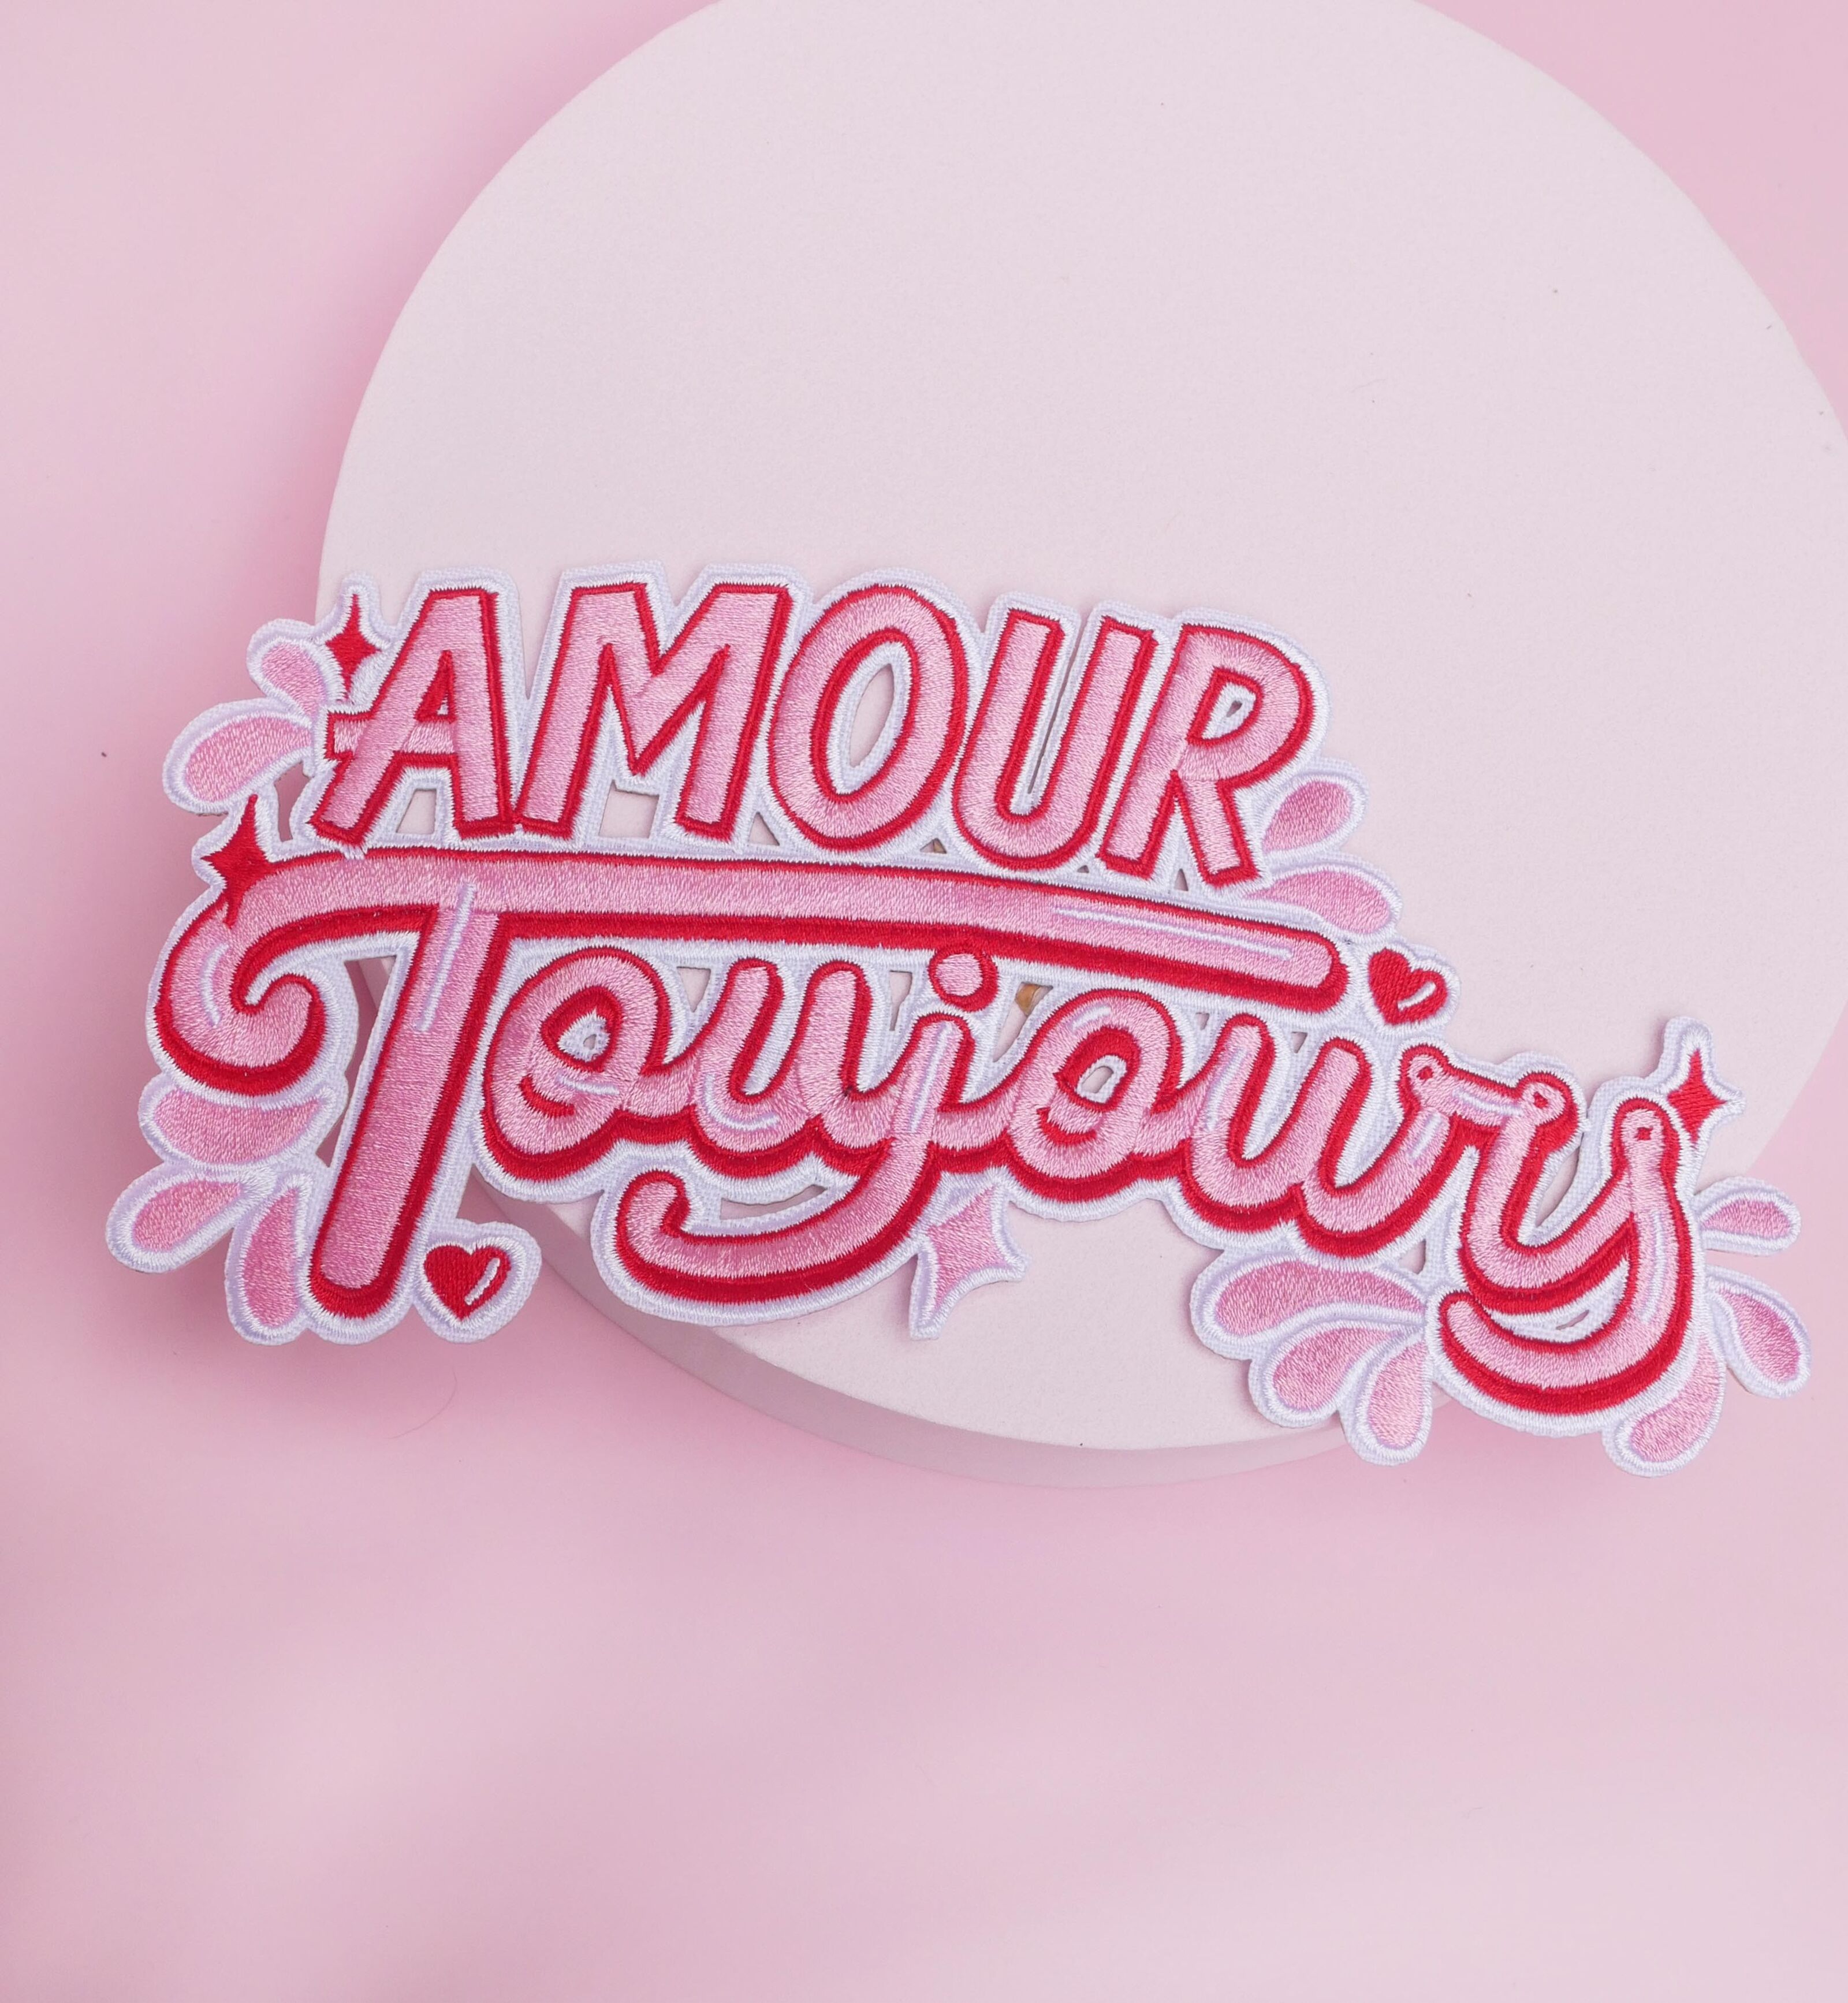 Ecusson Malicieuse - Patch thermocollant Self Love 